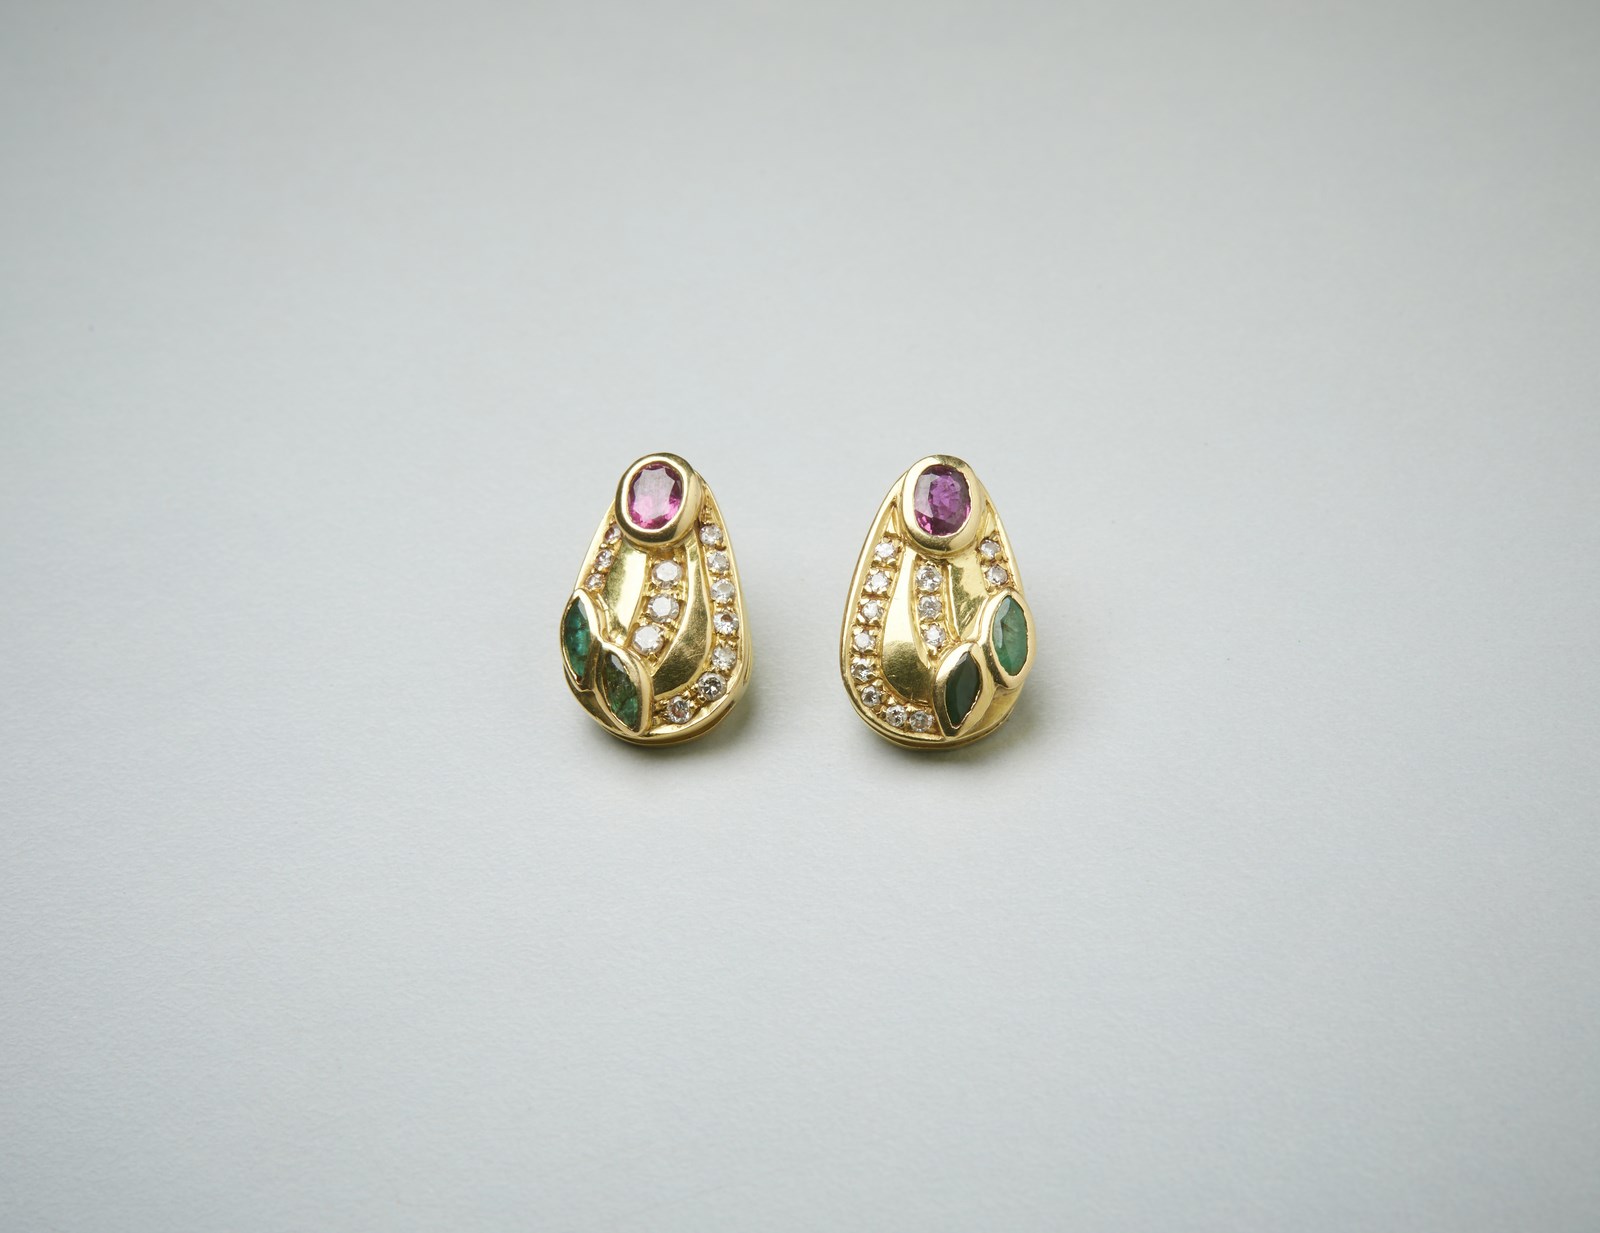 Pair of earrings in yellow gold with  rubies, diamonds and emeralds. (. )